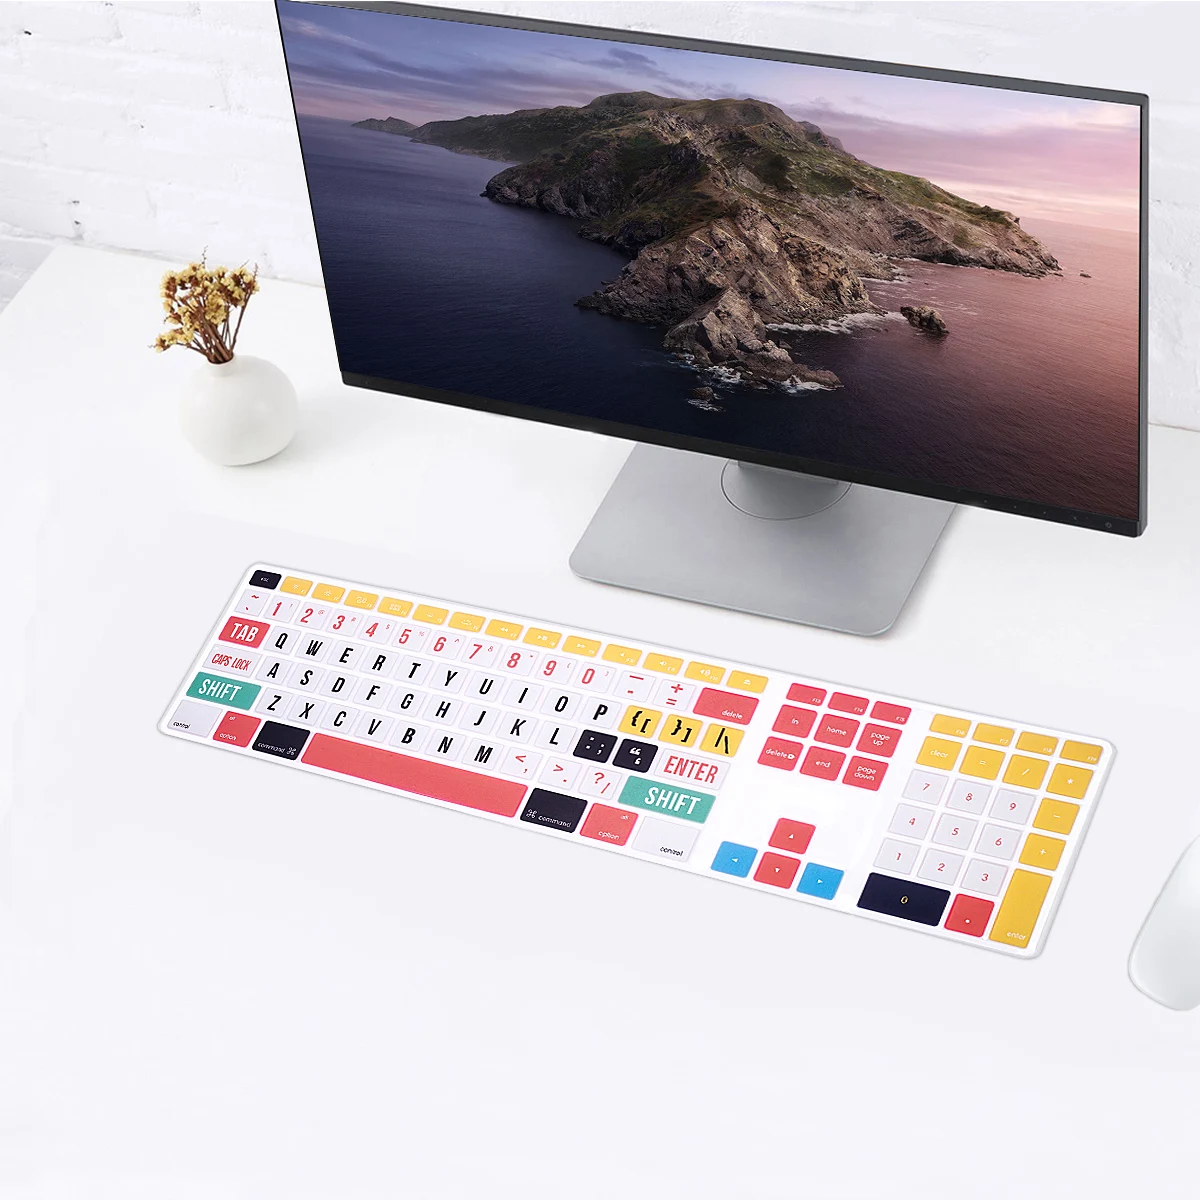 Keyboard Cover Skin for Apple Wired USB Keyboard with Numeric Keypad G6 A1243 MB110LL/B MB110LL/A Thin Silicone Protective Skin